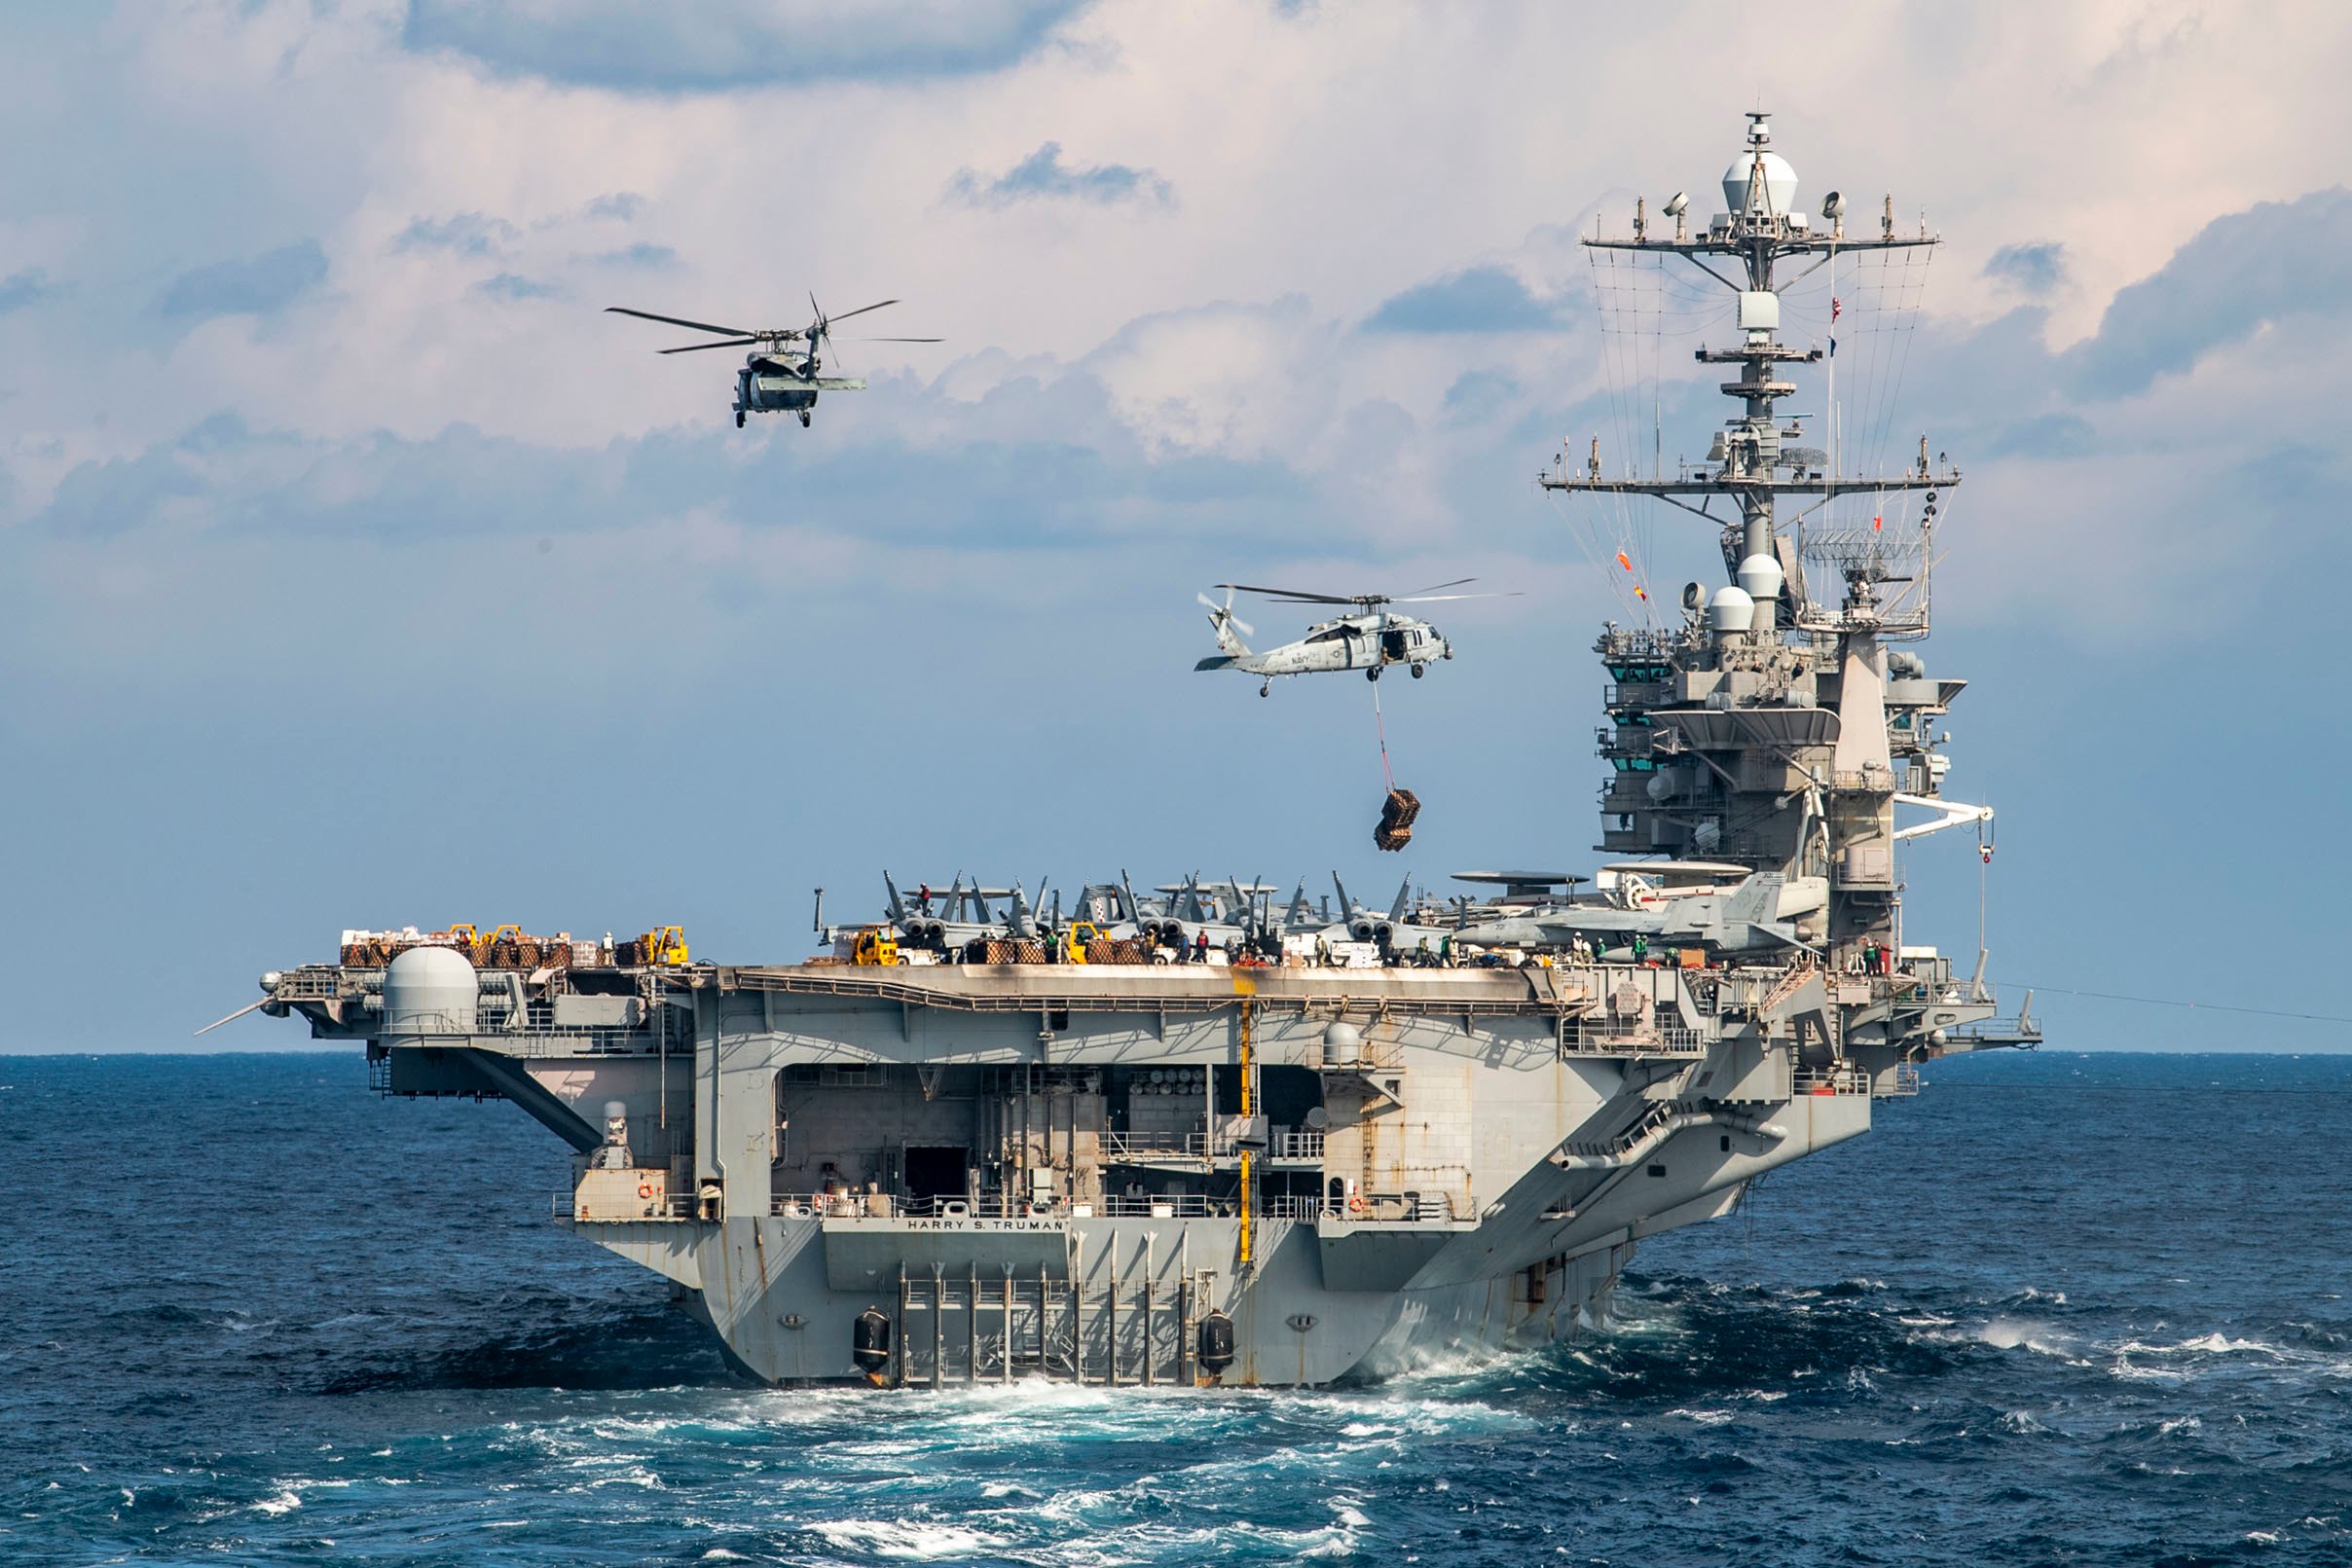 USS Harry S. Truman completes its European deployment as Pride of the Fleet